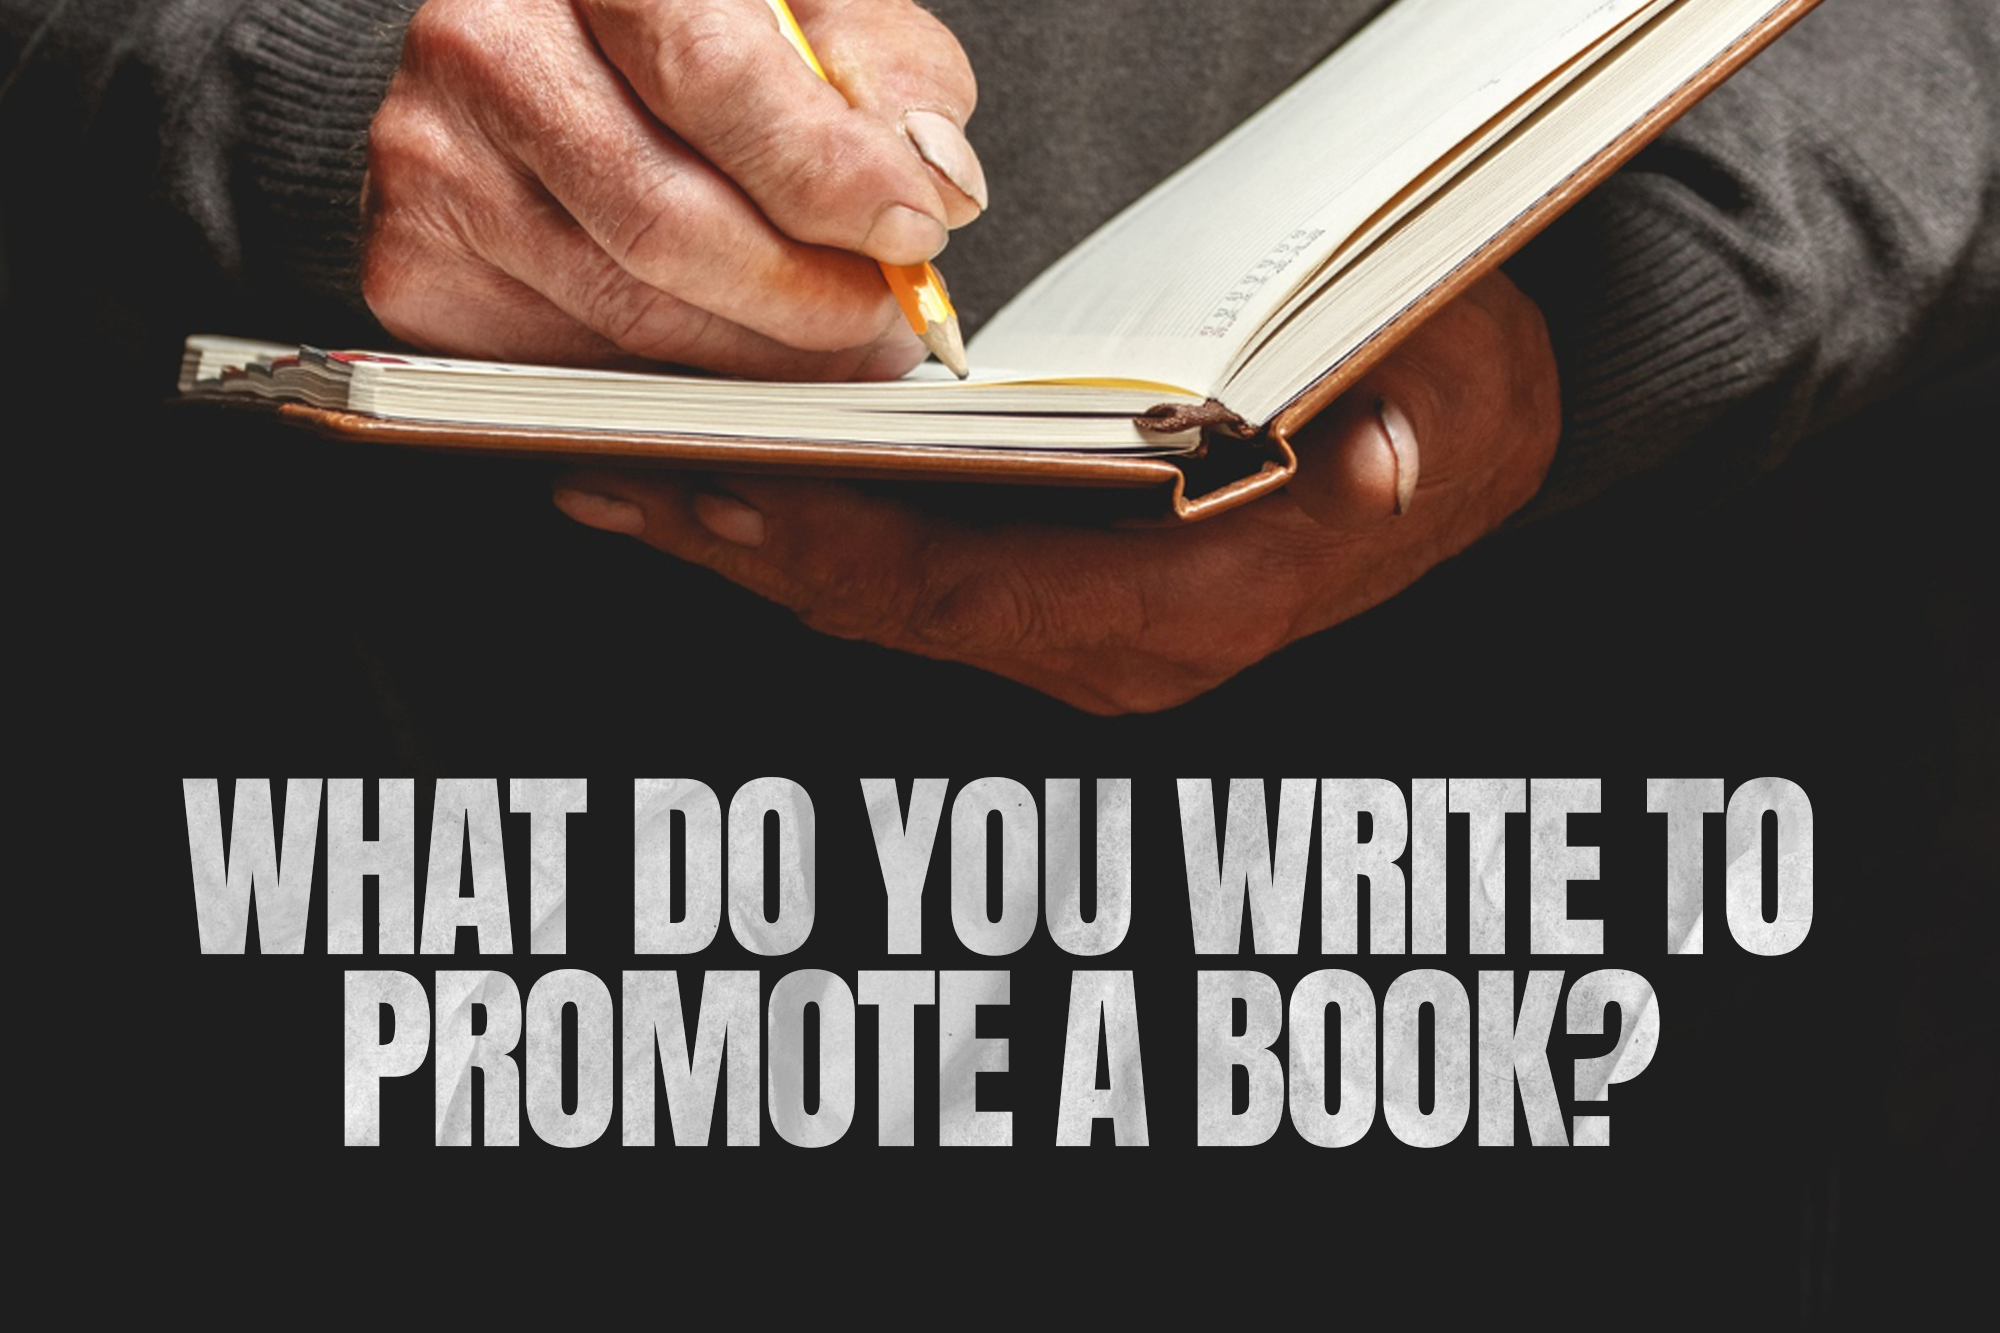 What do you write to promote a book